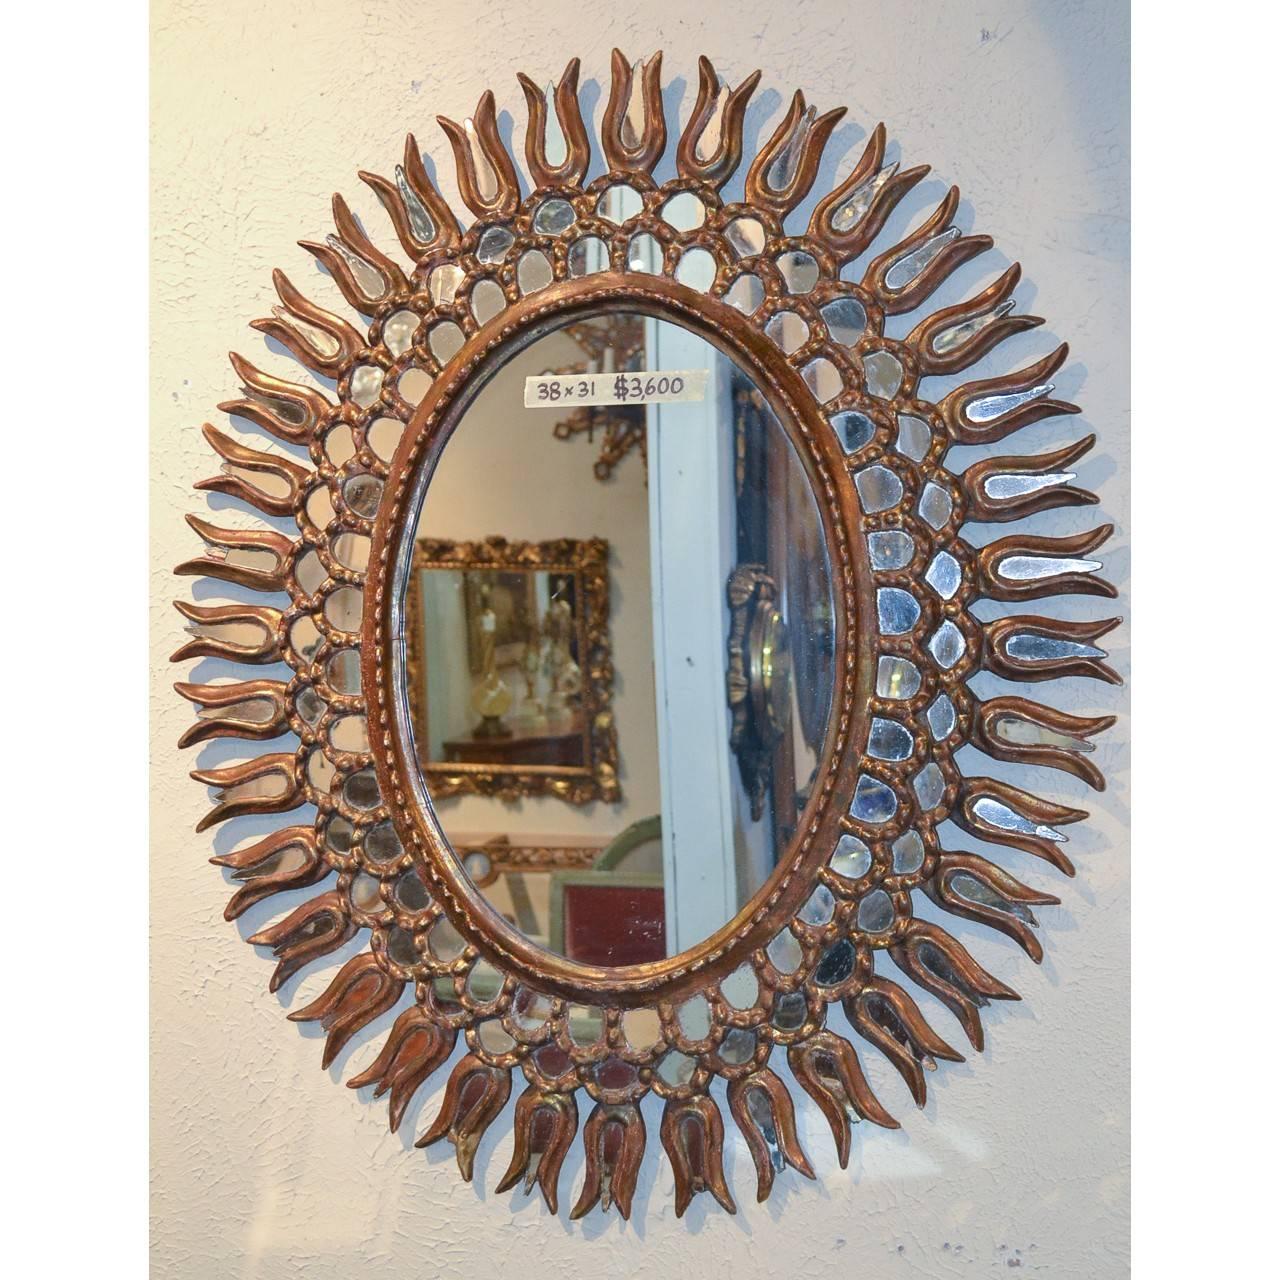 Midcentury mirror made in Italy. Sought after by today's designers like it was in the 1940s,

circa 1940.